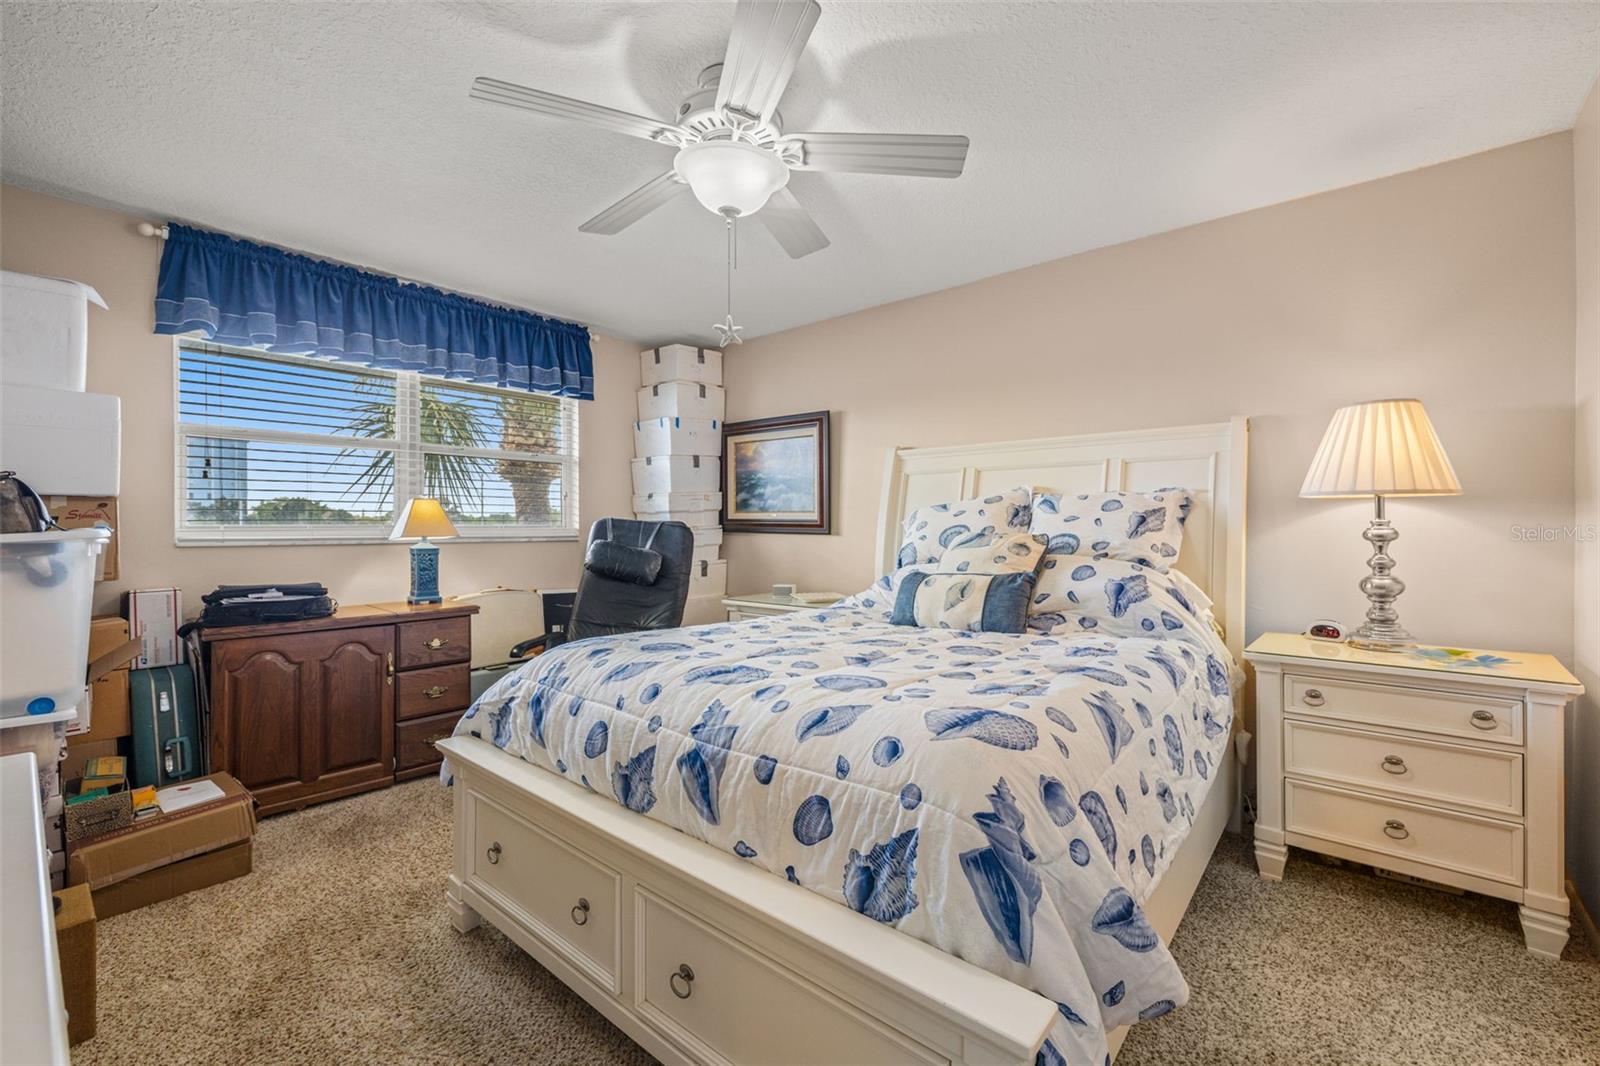 Primary bedroom which can easily accommodate a king-sized bed, features newer windows, ceiling fan, sliding glass door to the lanai, walk-in closet, extra storage/dresser space as well as attic access.